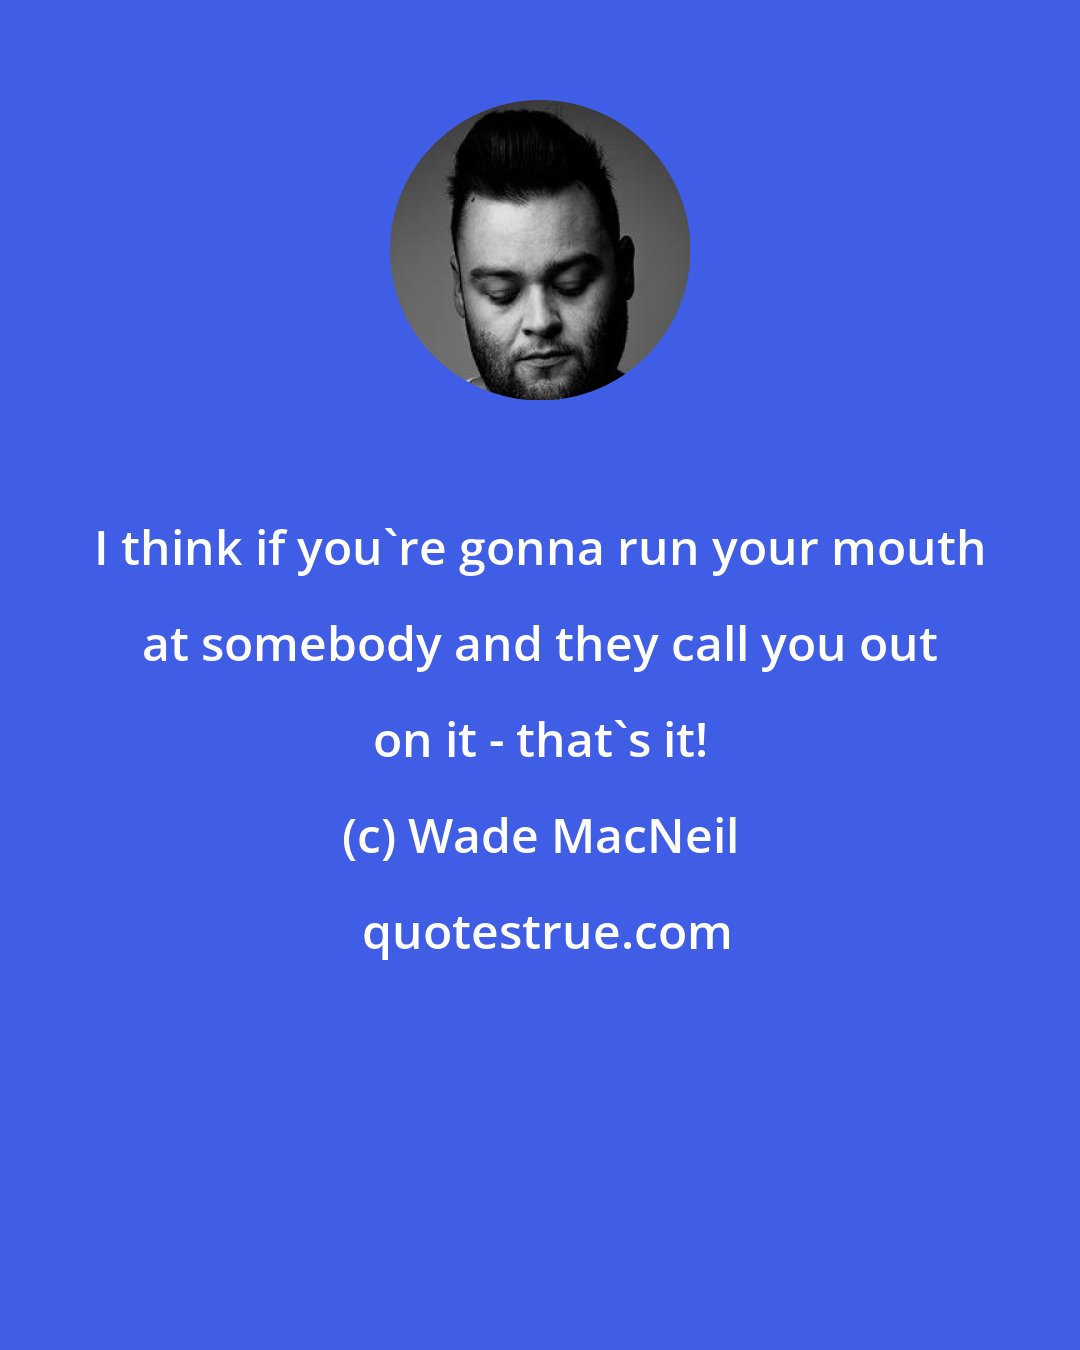 Wade MacNeil: I think if you're gonna run your mouth at somebody and they call you out on it - that's it!